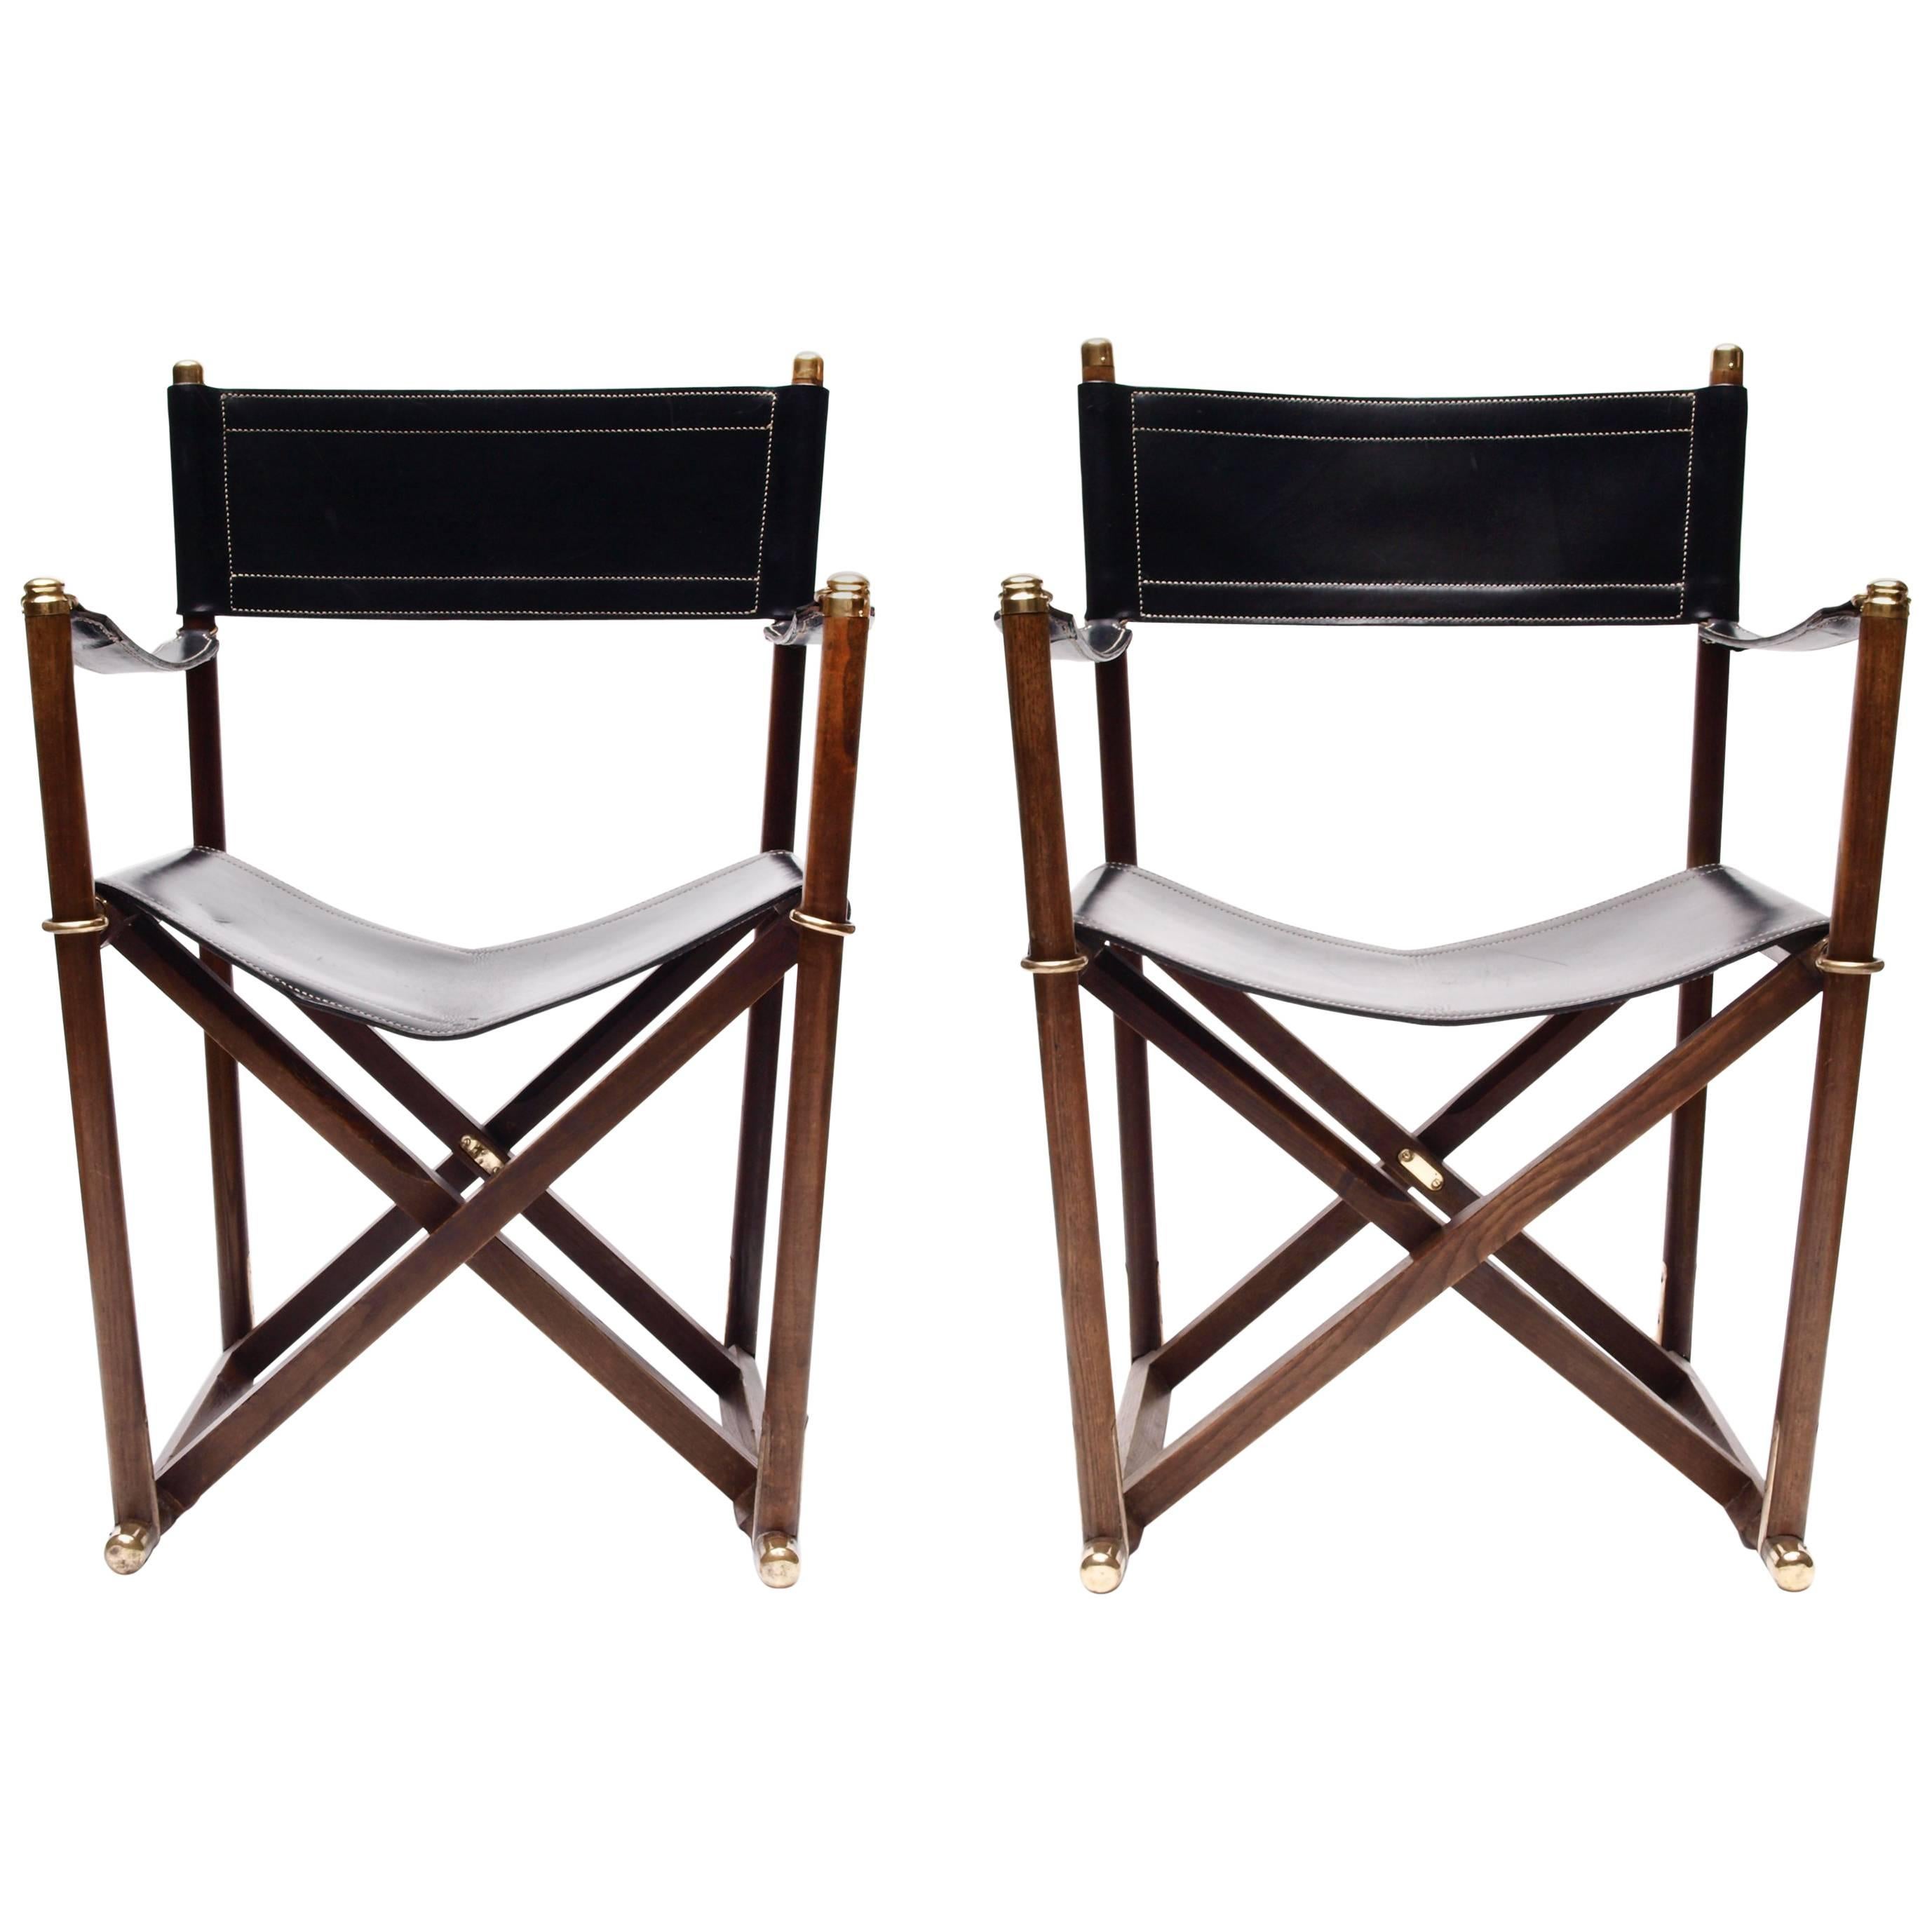 Important Pair of Mogens Koch MK-16 Folding Campaign Chairs